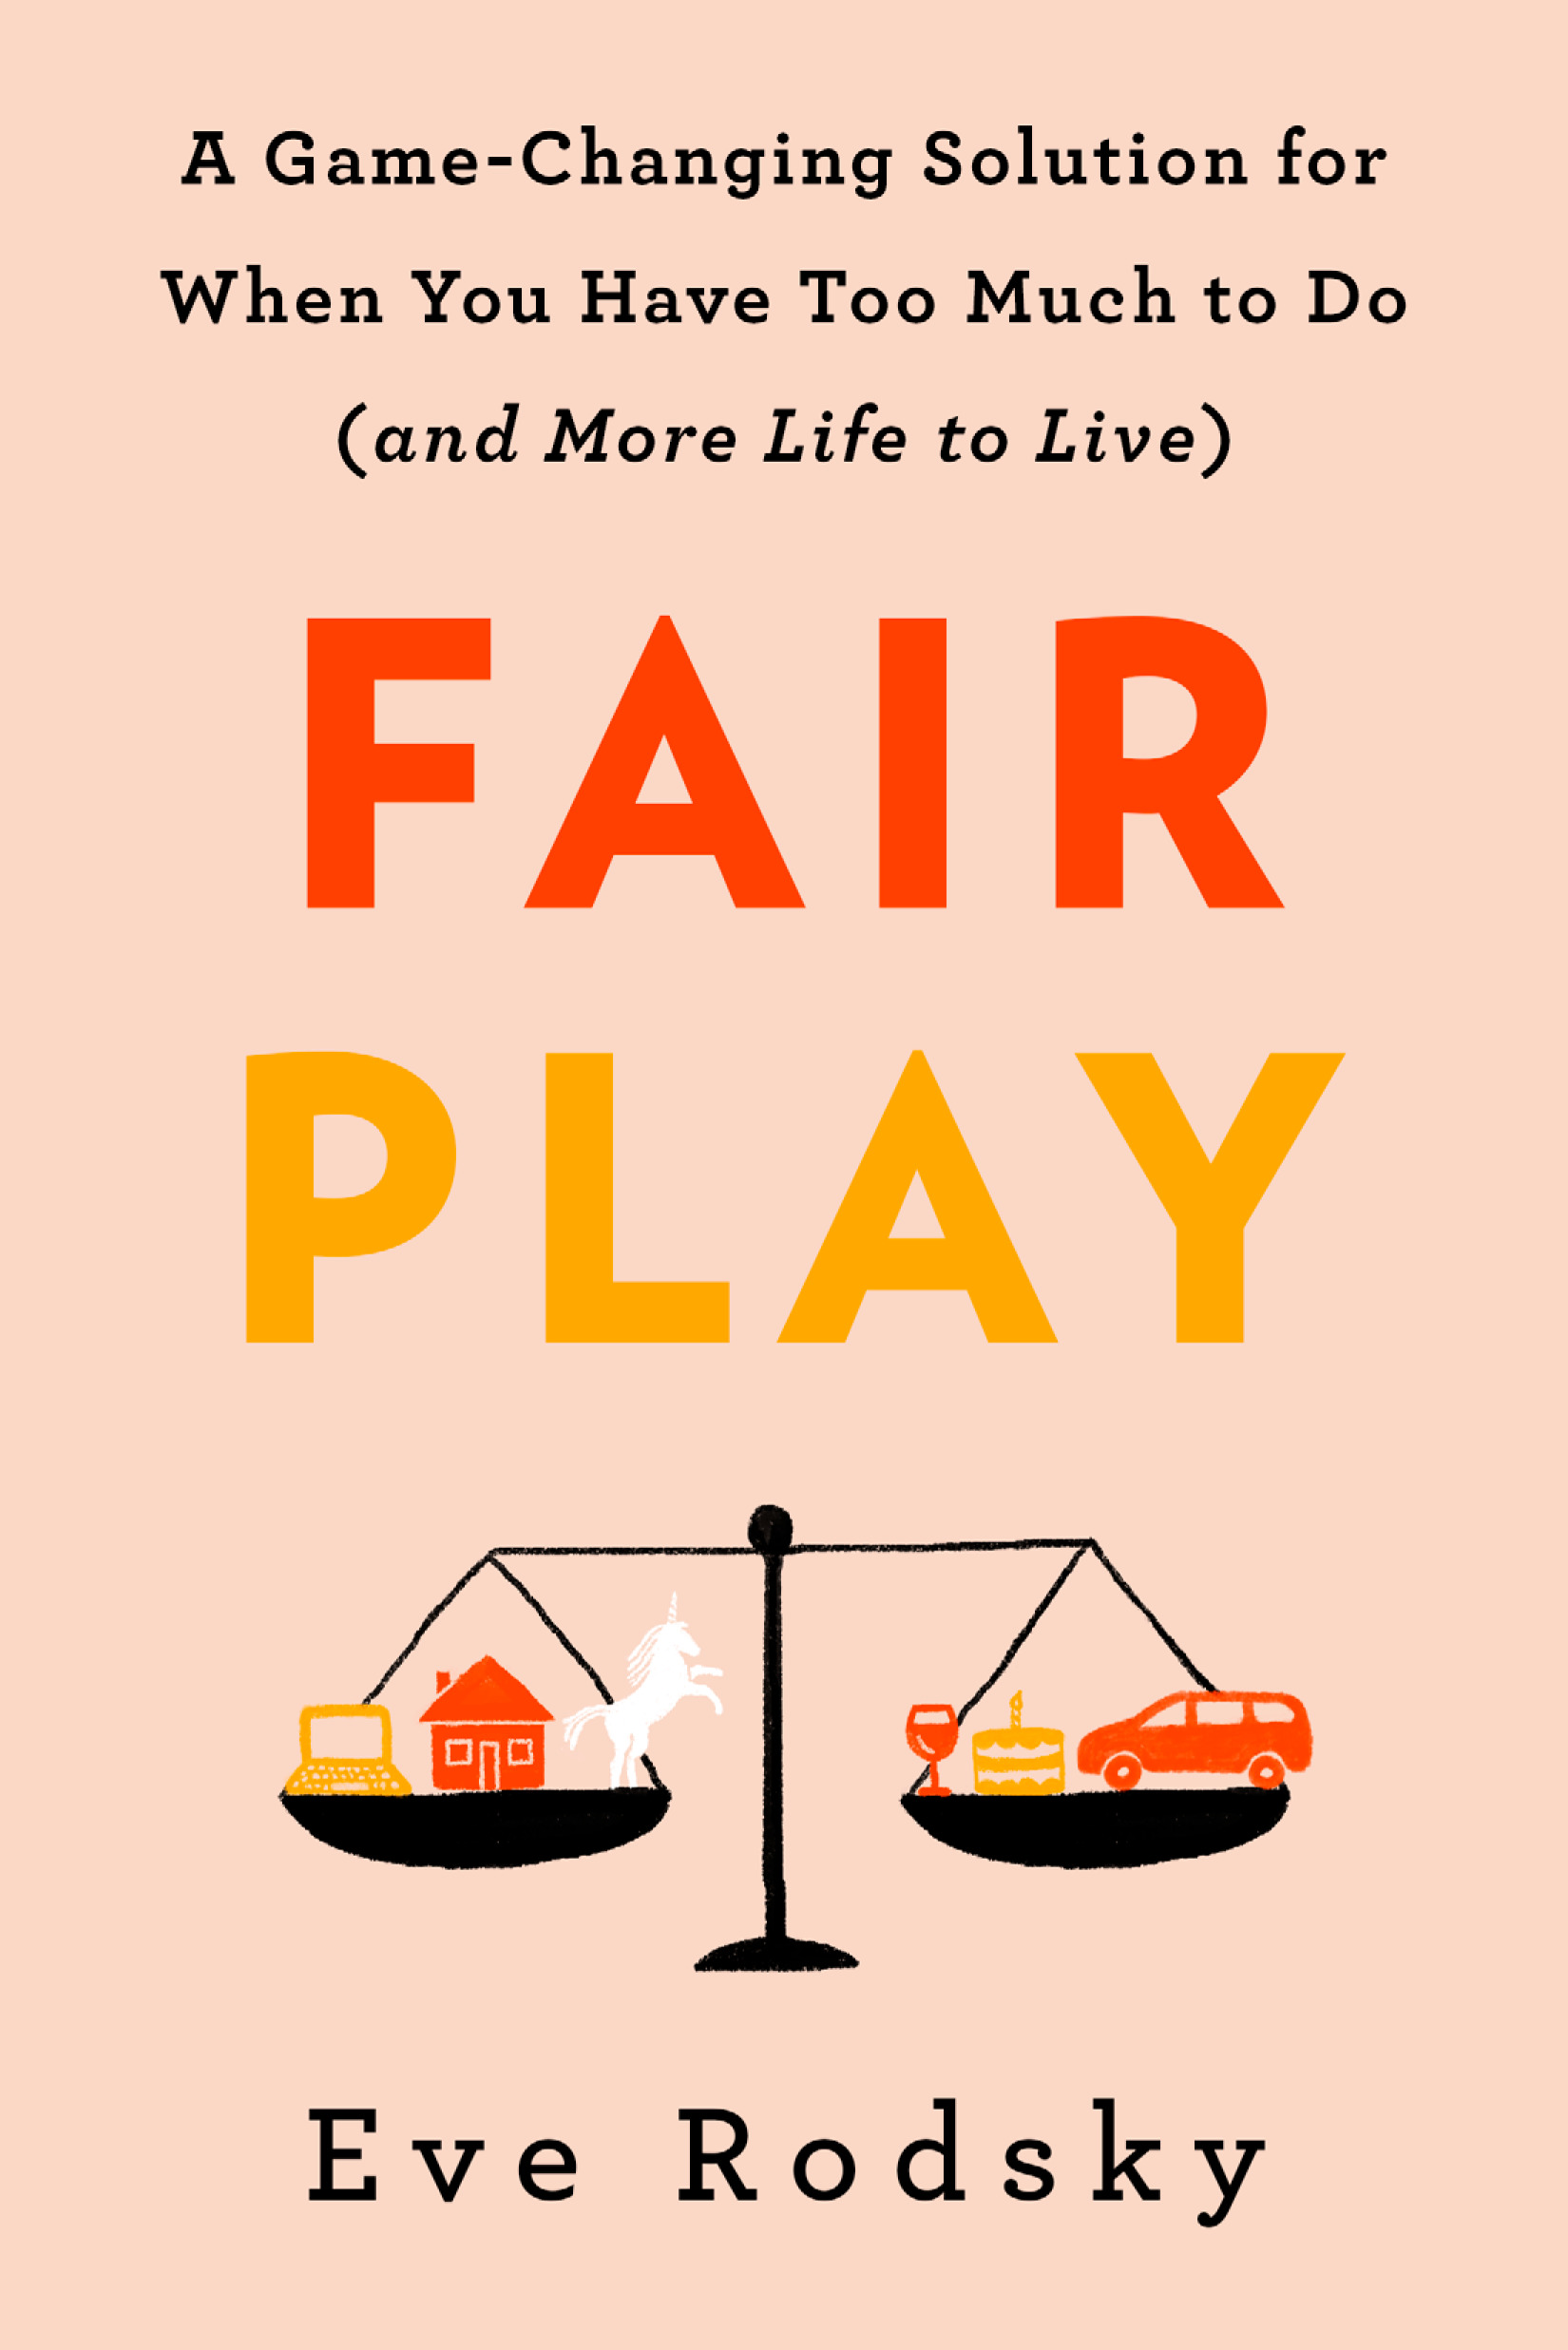 Fair Play by Eve Rodsky PDF Download